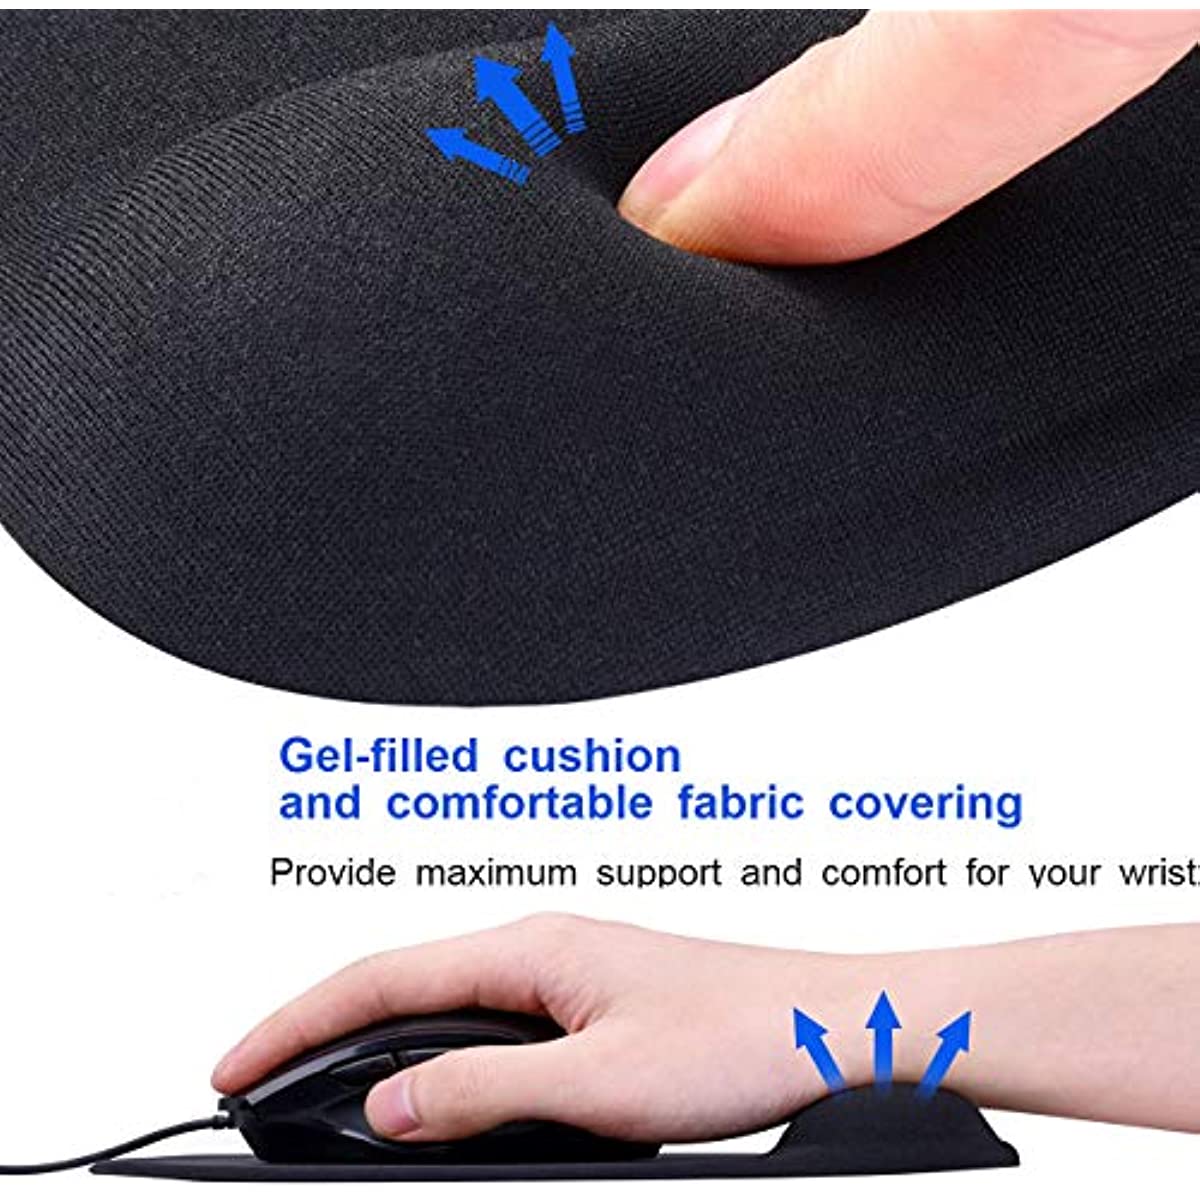 ZINMARK 2 Pack Ergonomic Mouse Pads for Easy Typing Pain Relief, Durable and Washable for Easy Cleaning